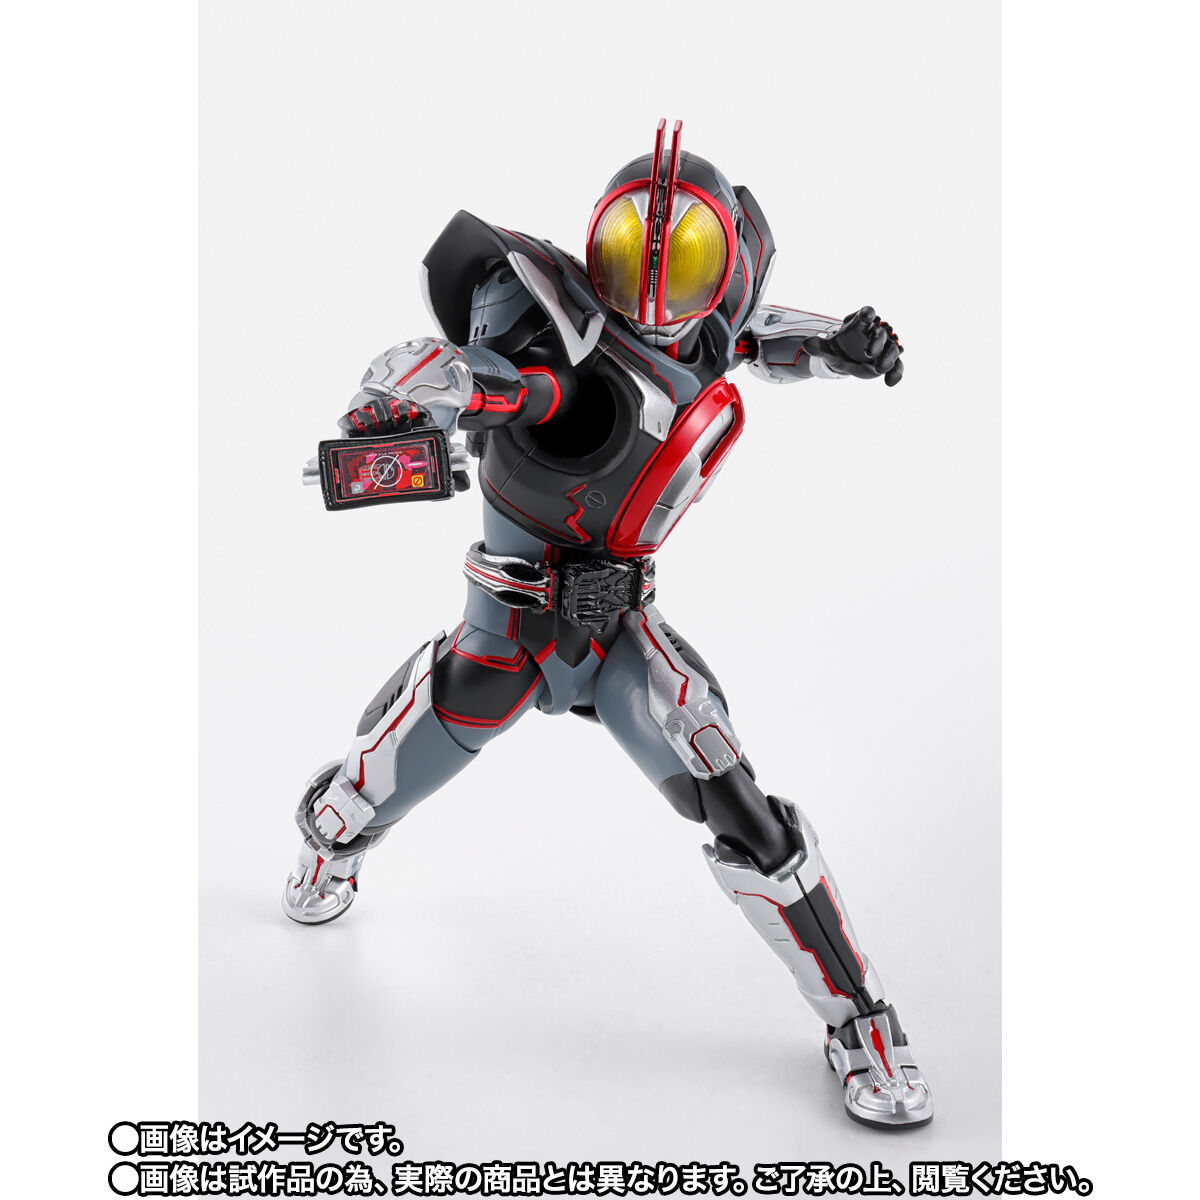 S.H.figures 真骨頂製法 仮面ライダーファイズ【新品未開封】新品未